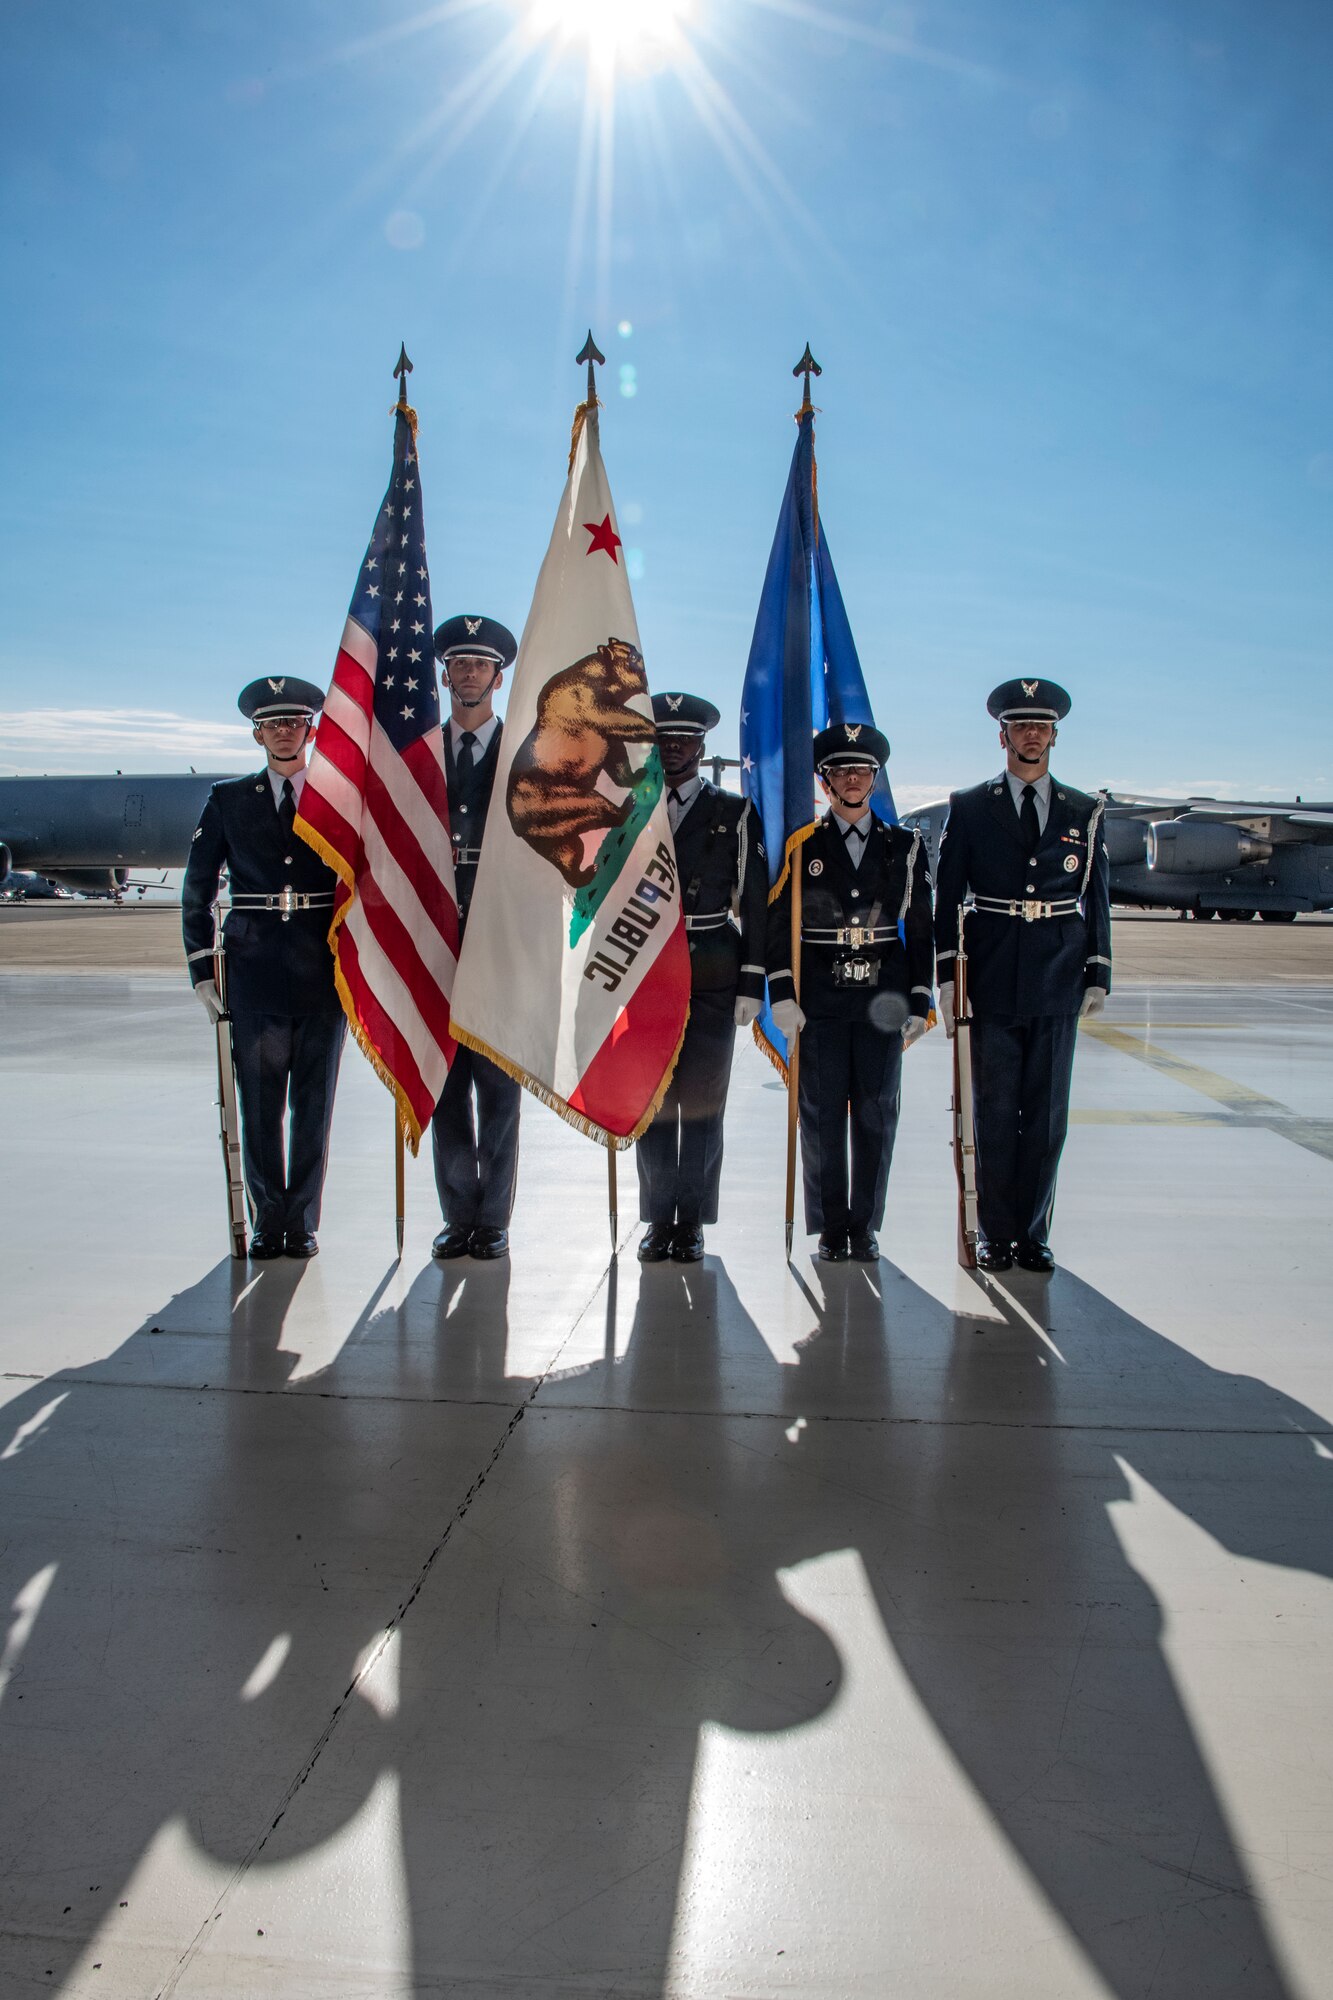 5 Airmen stand stand, 3 hold a flag each.